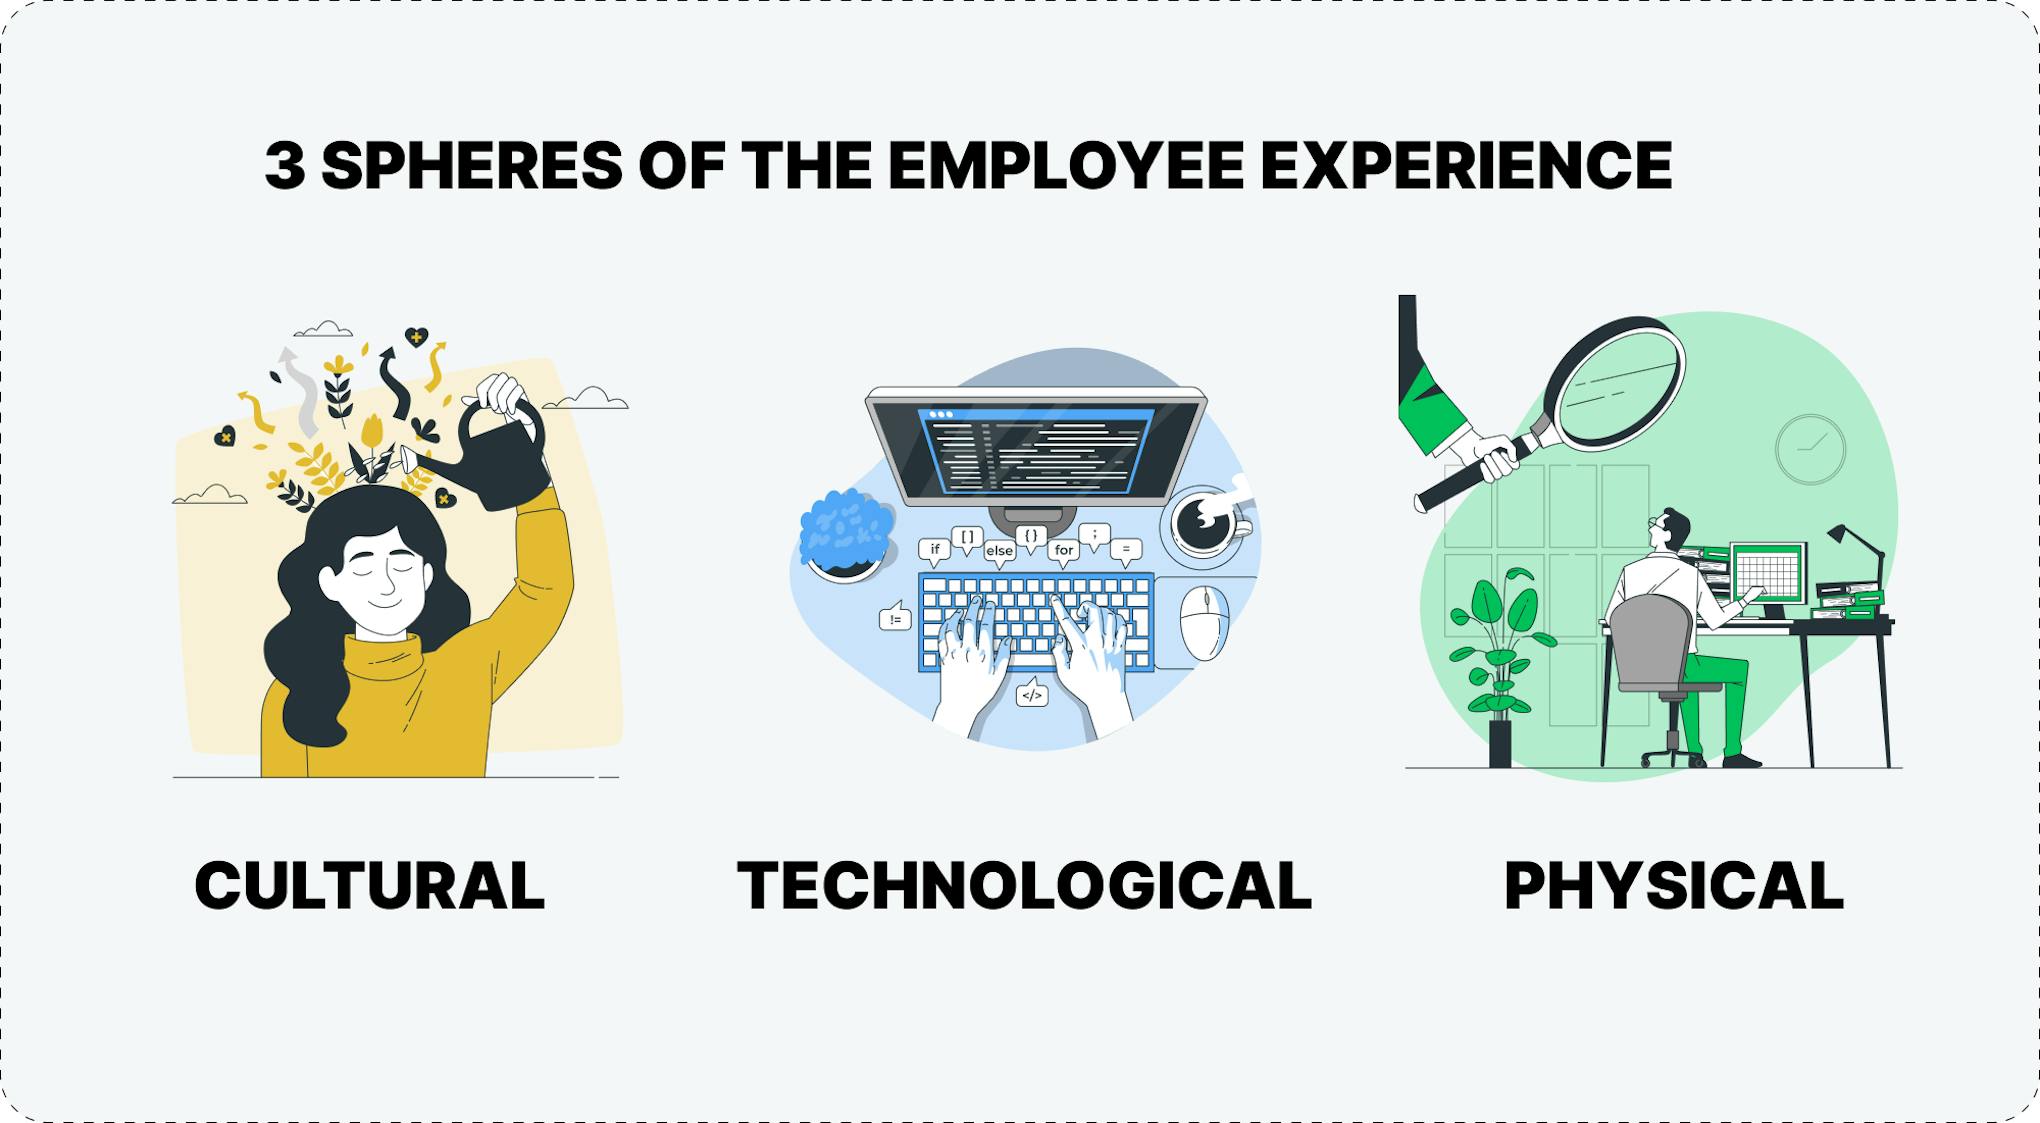 3 spheres of the employee experience